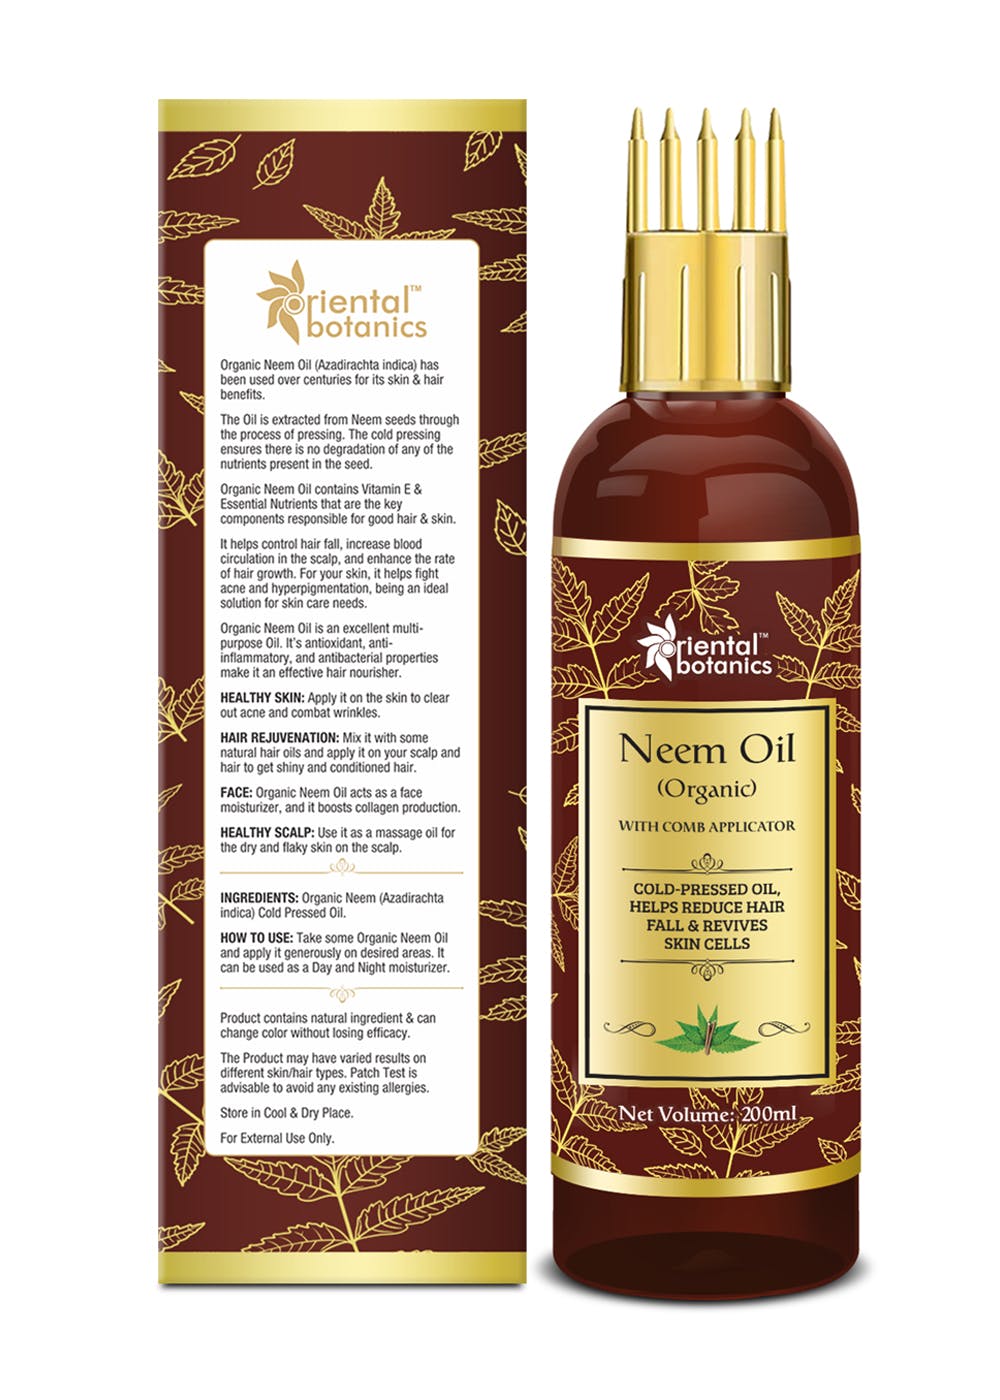 Get Organic Neem Oil for Hair and Skin Care - 200ml at ₹ 399 | LBB Shop